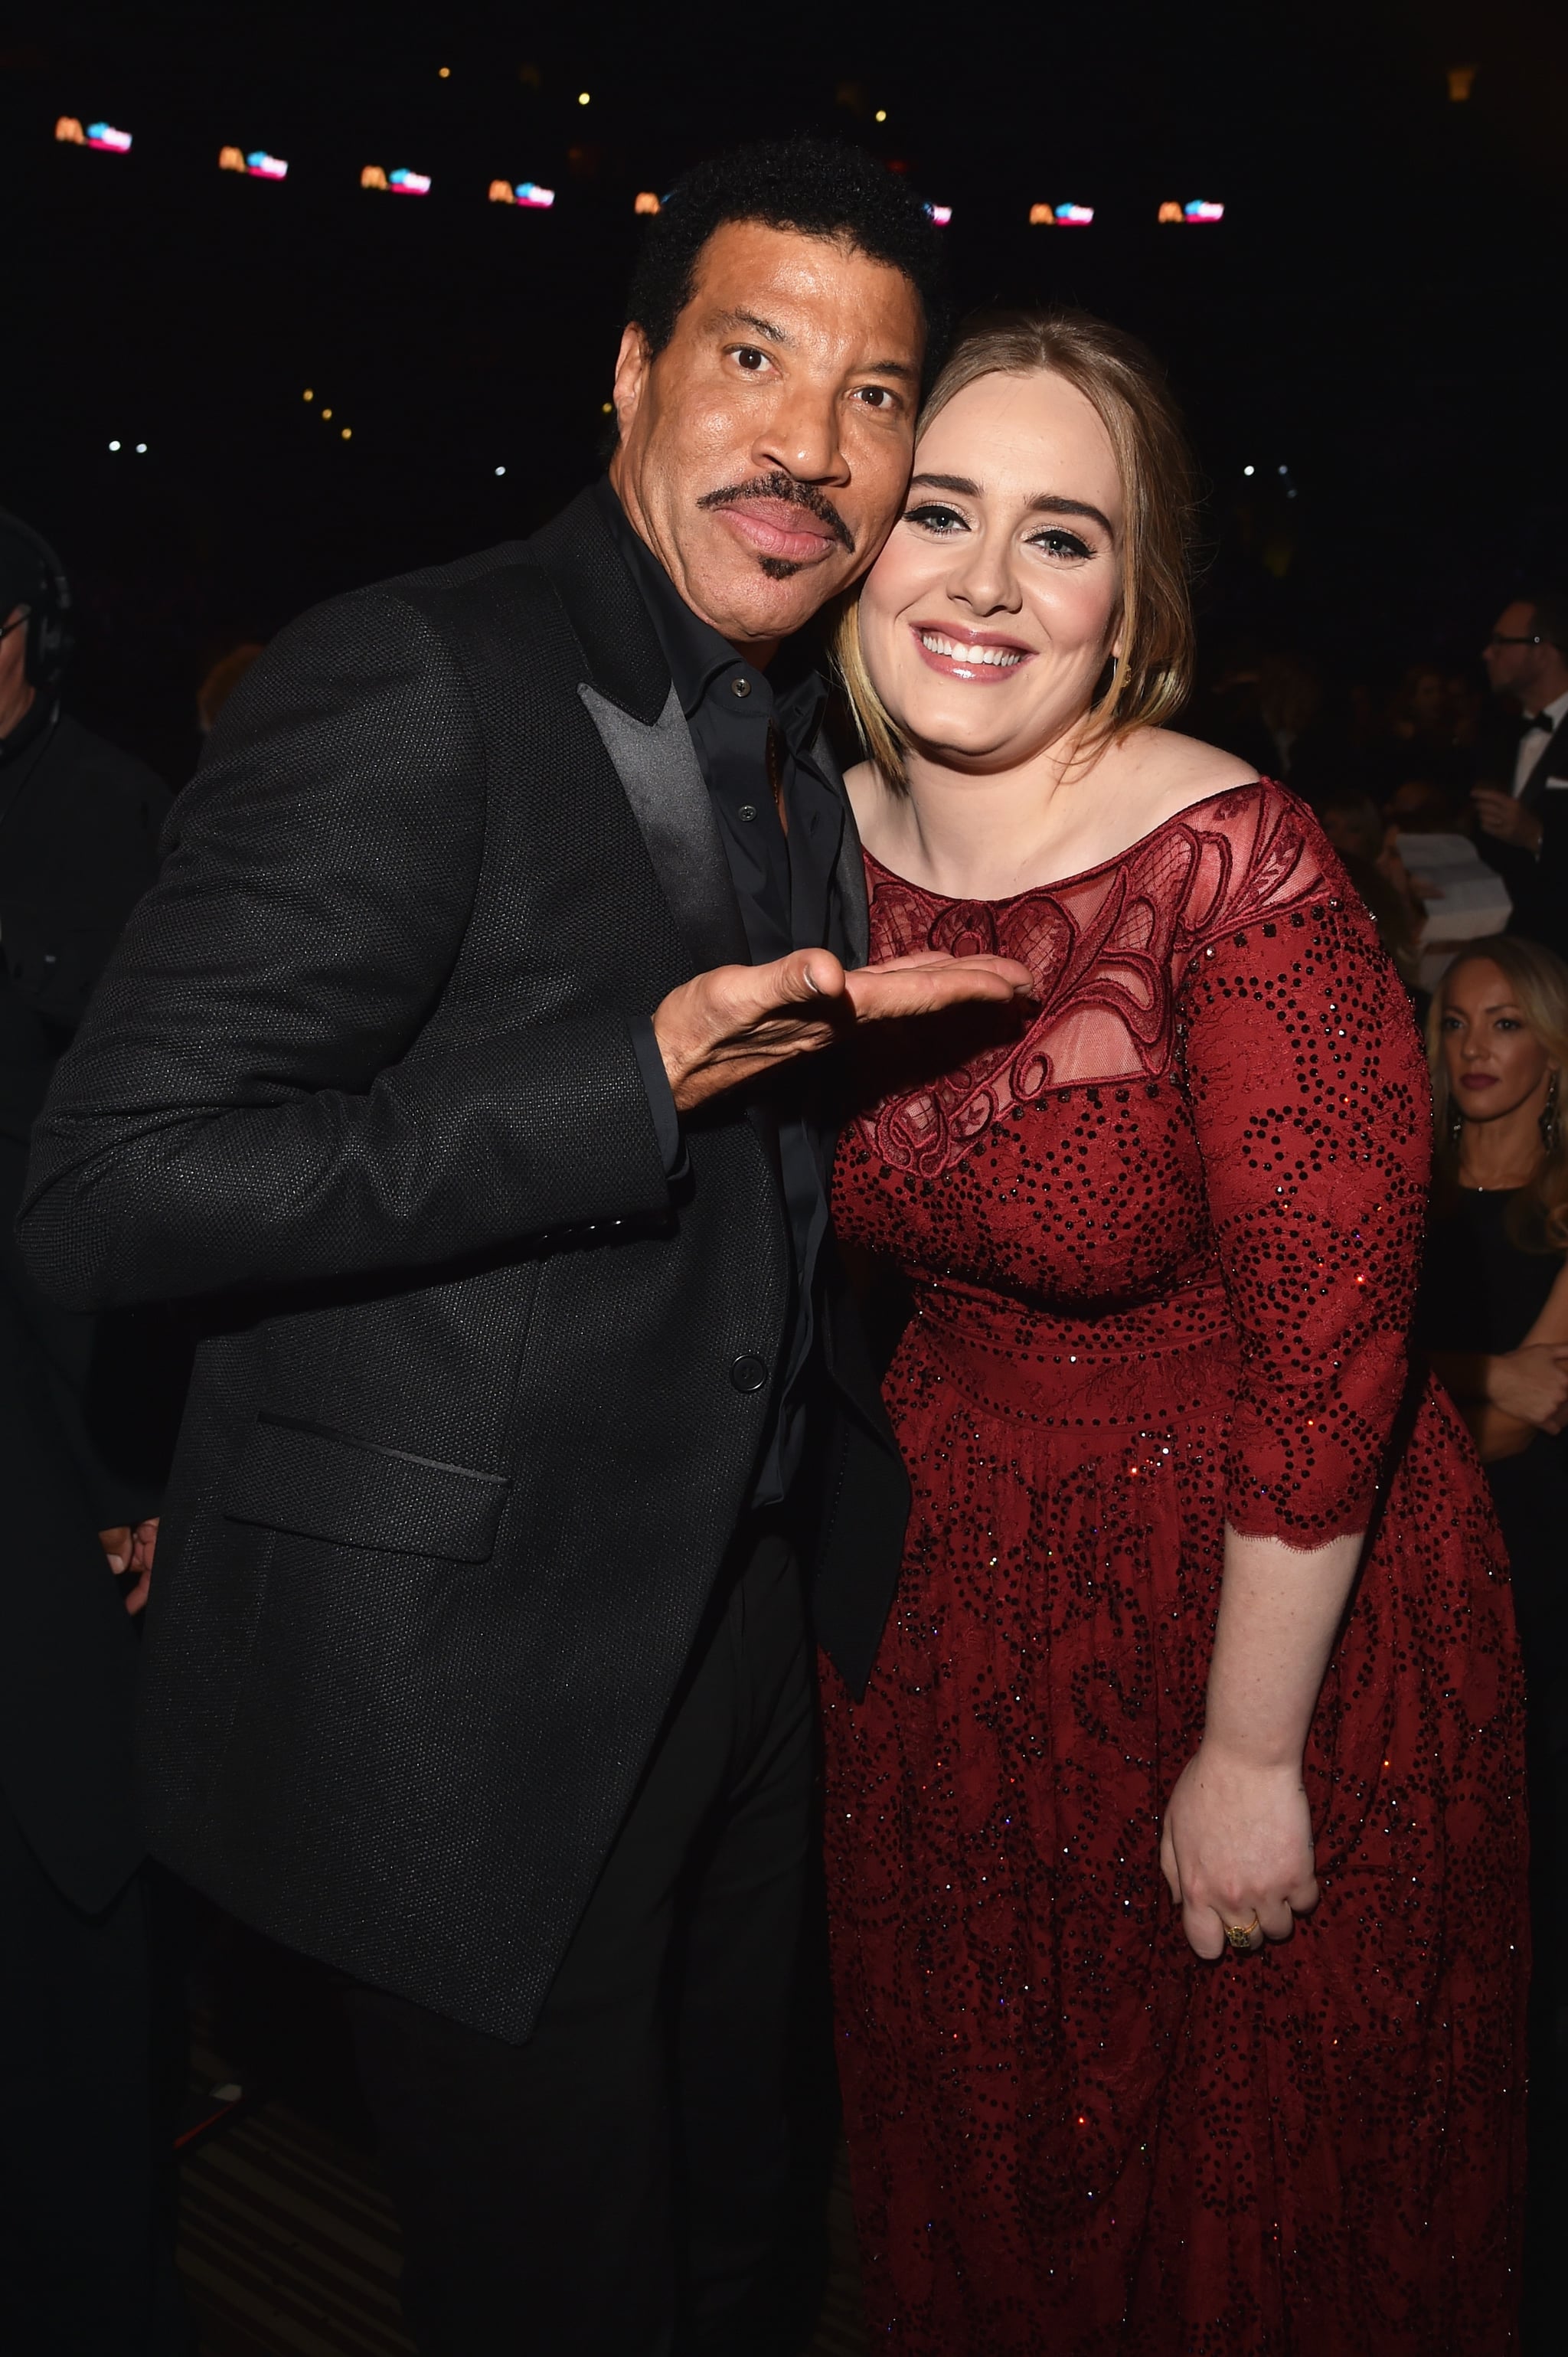 Lionel Richie and Adele said "hello" in 2016.